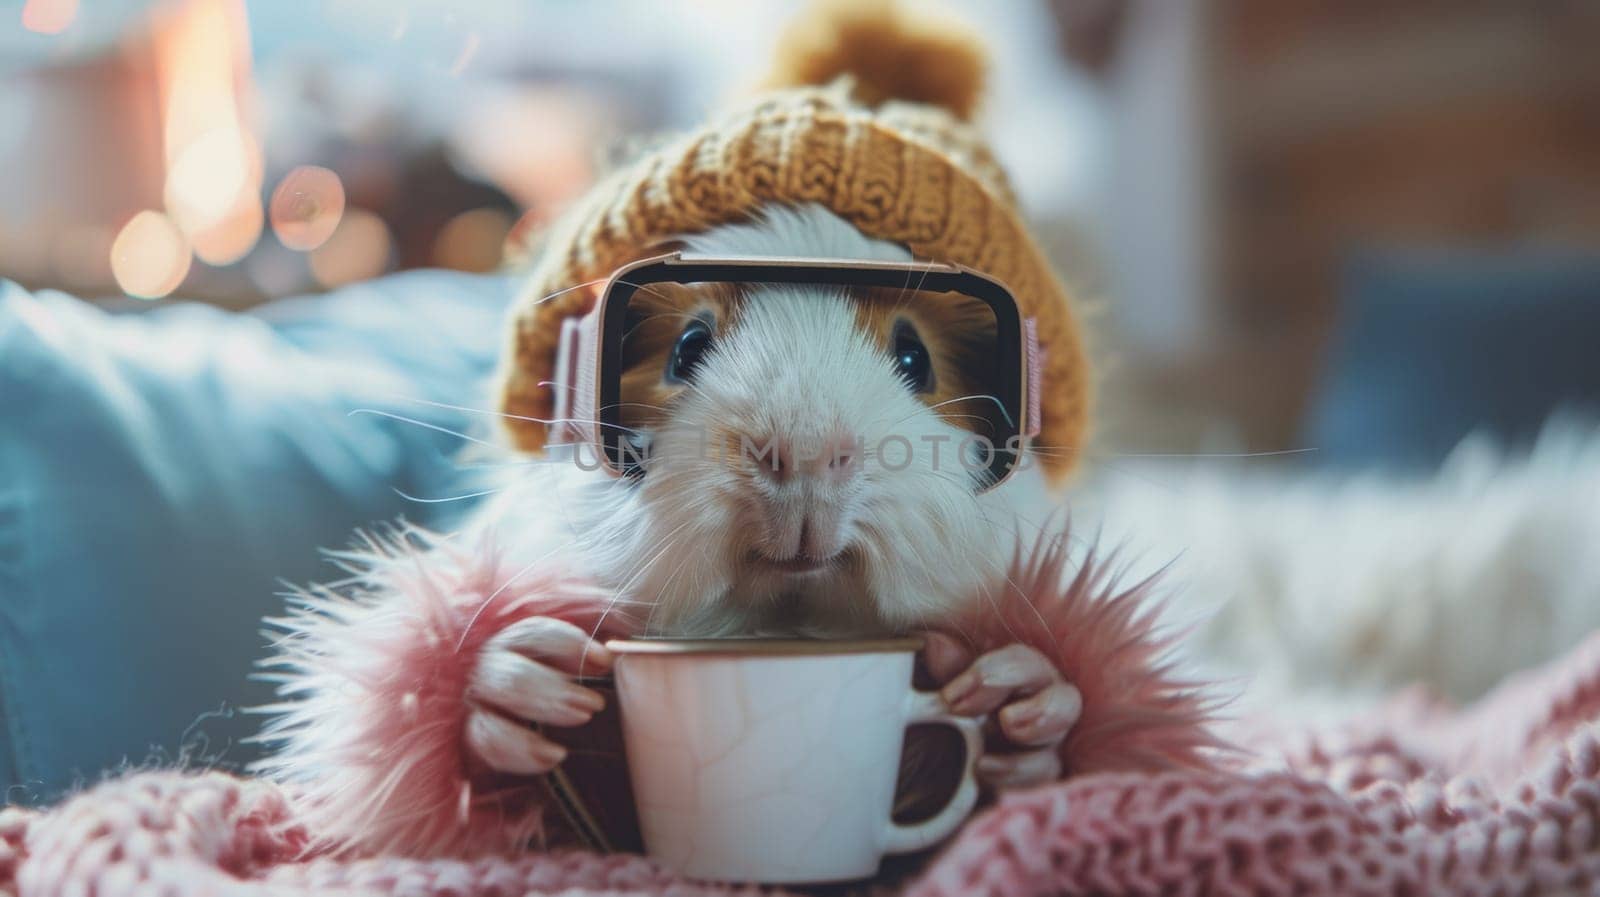 A guinea pig wearing glasses and holding a cup of coffee